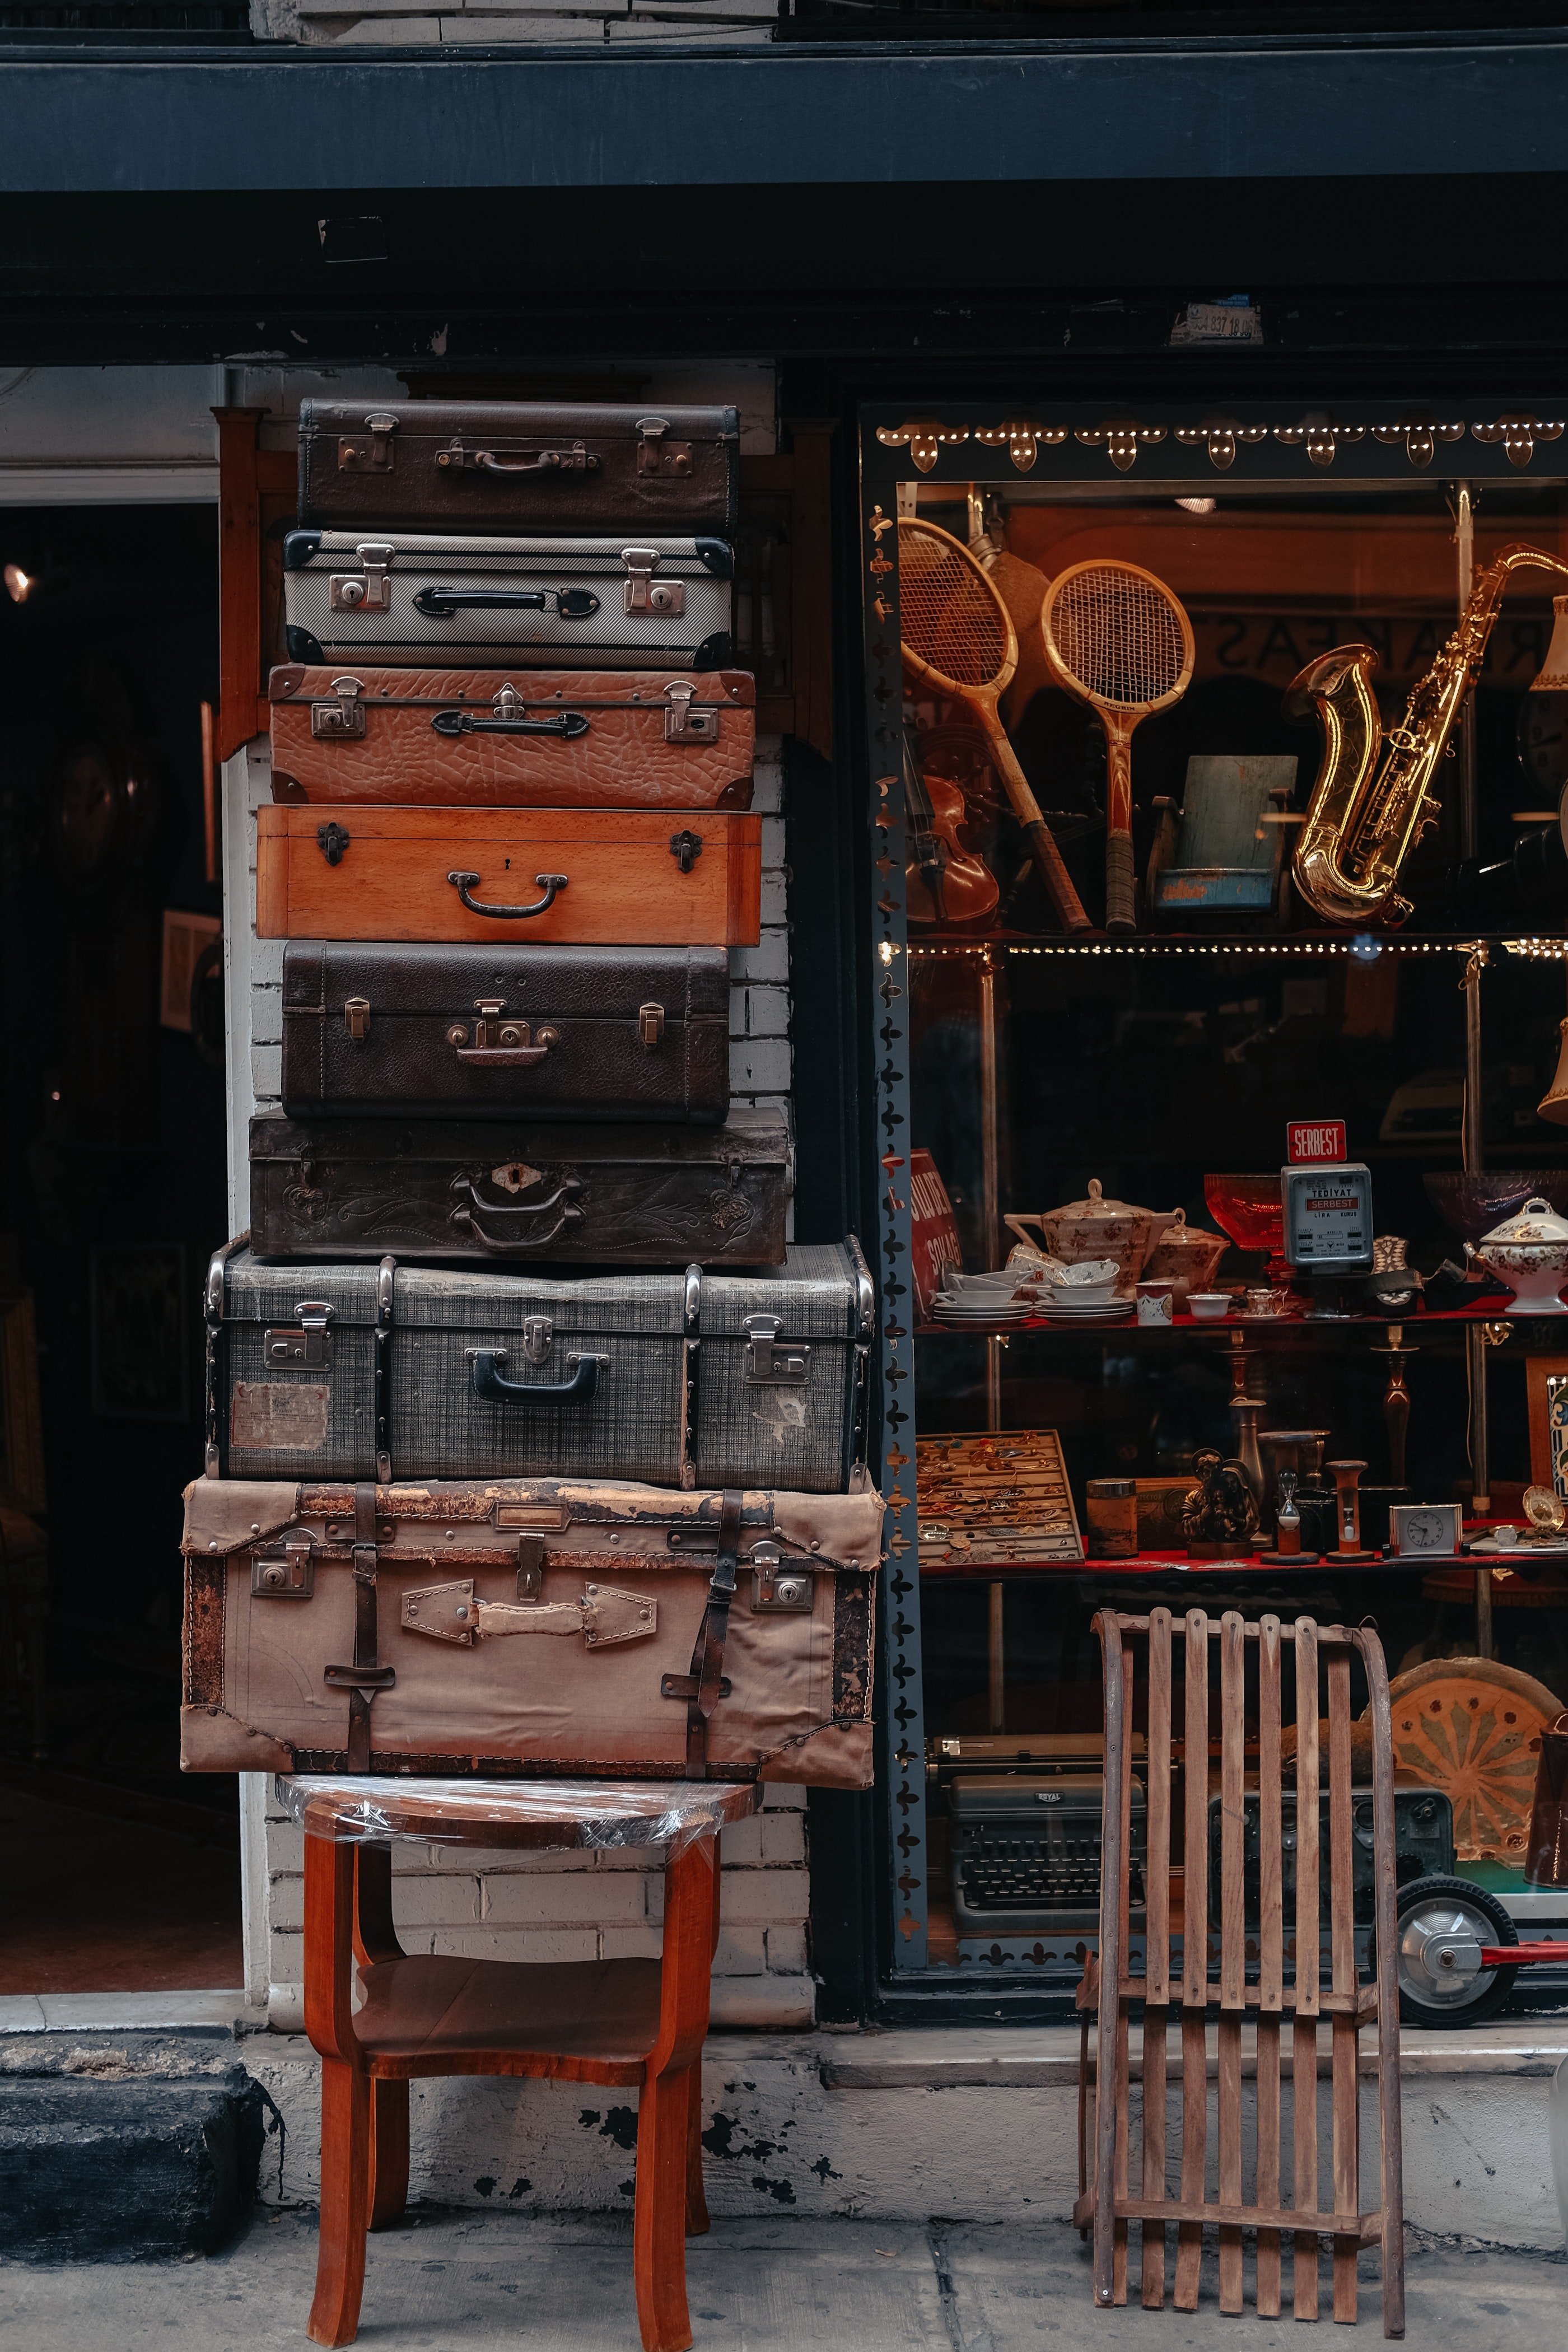 Harold entered a local antique shop to ask for some food and met the owner. | Photo: Pexels